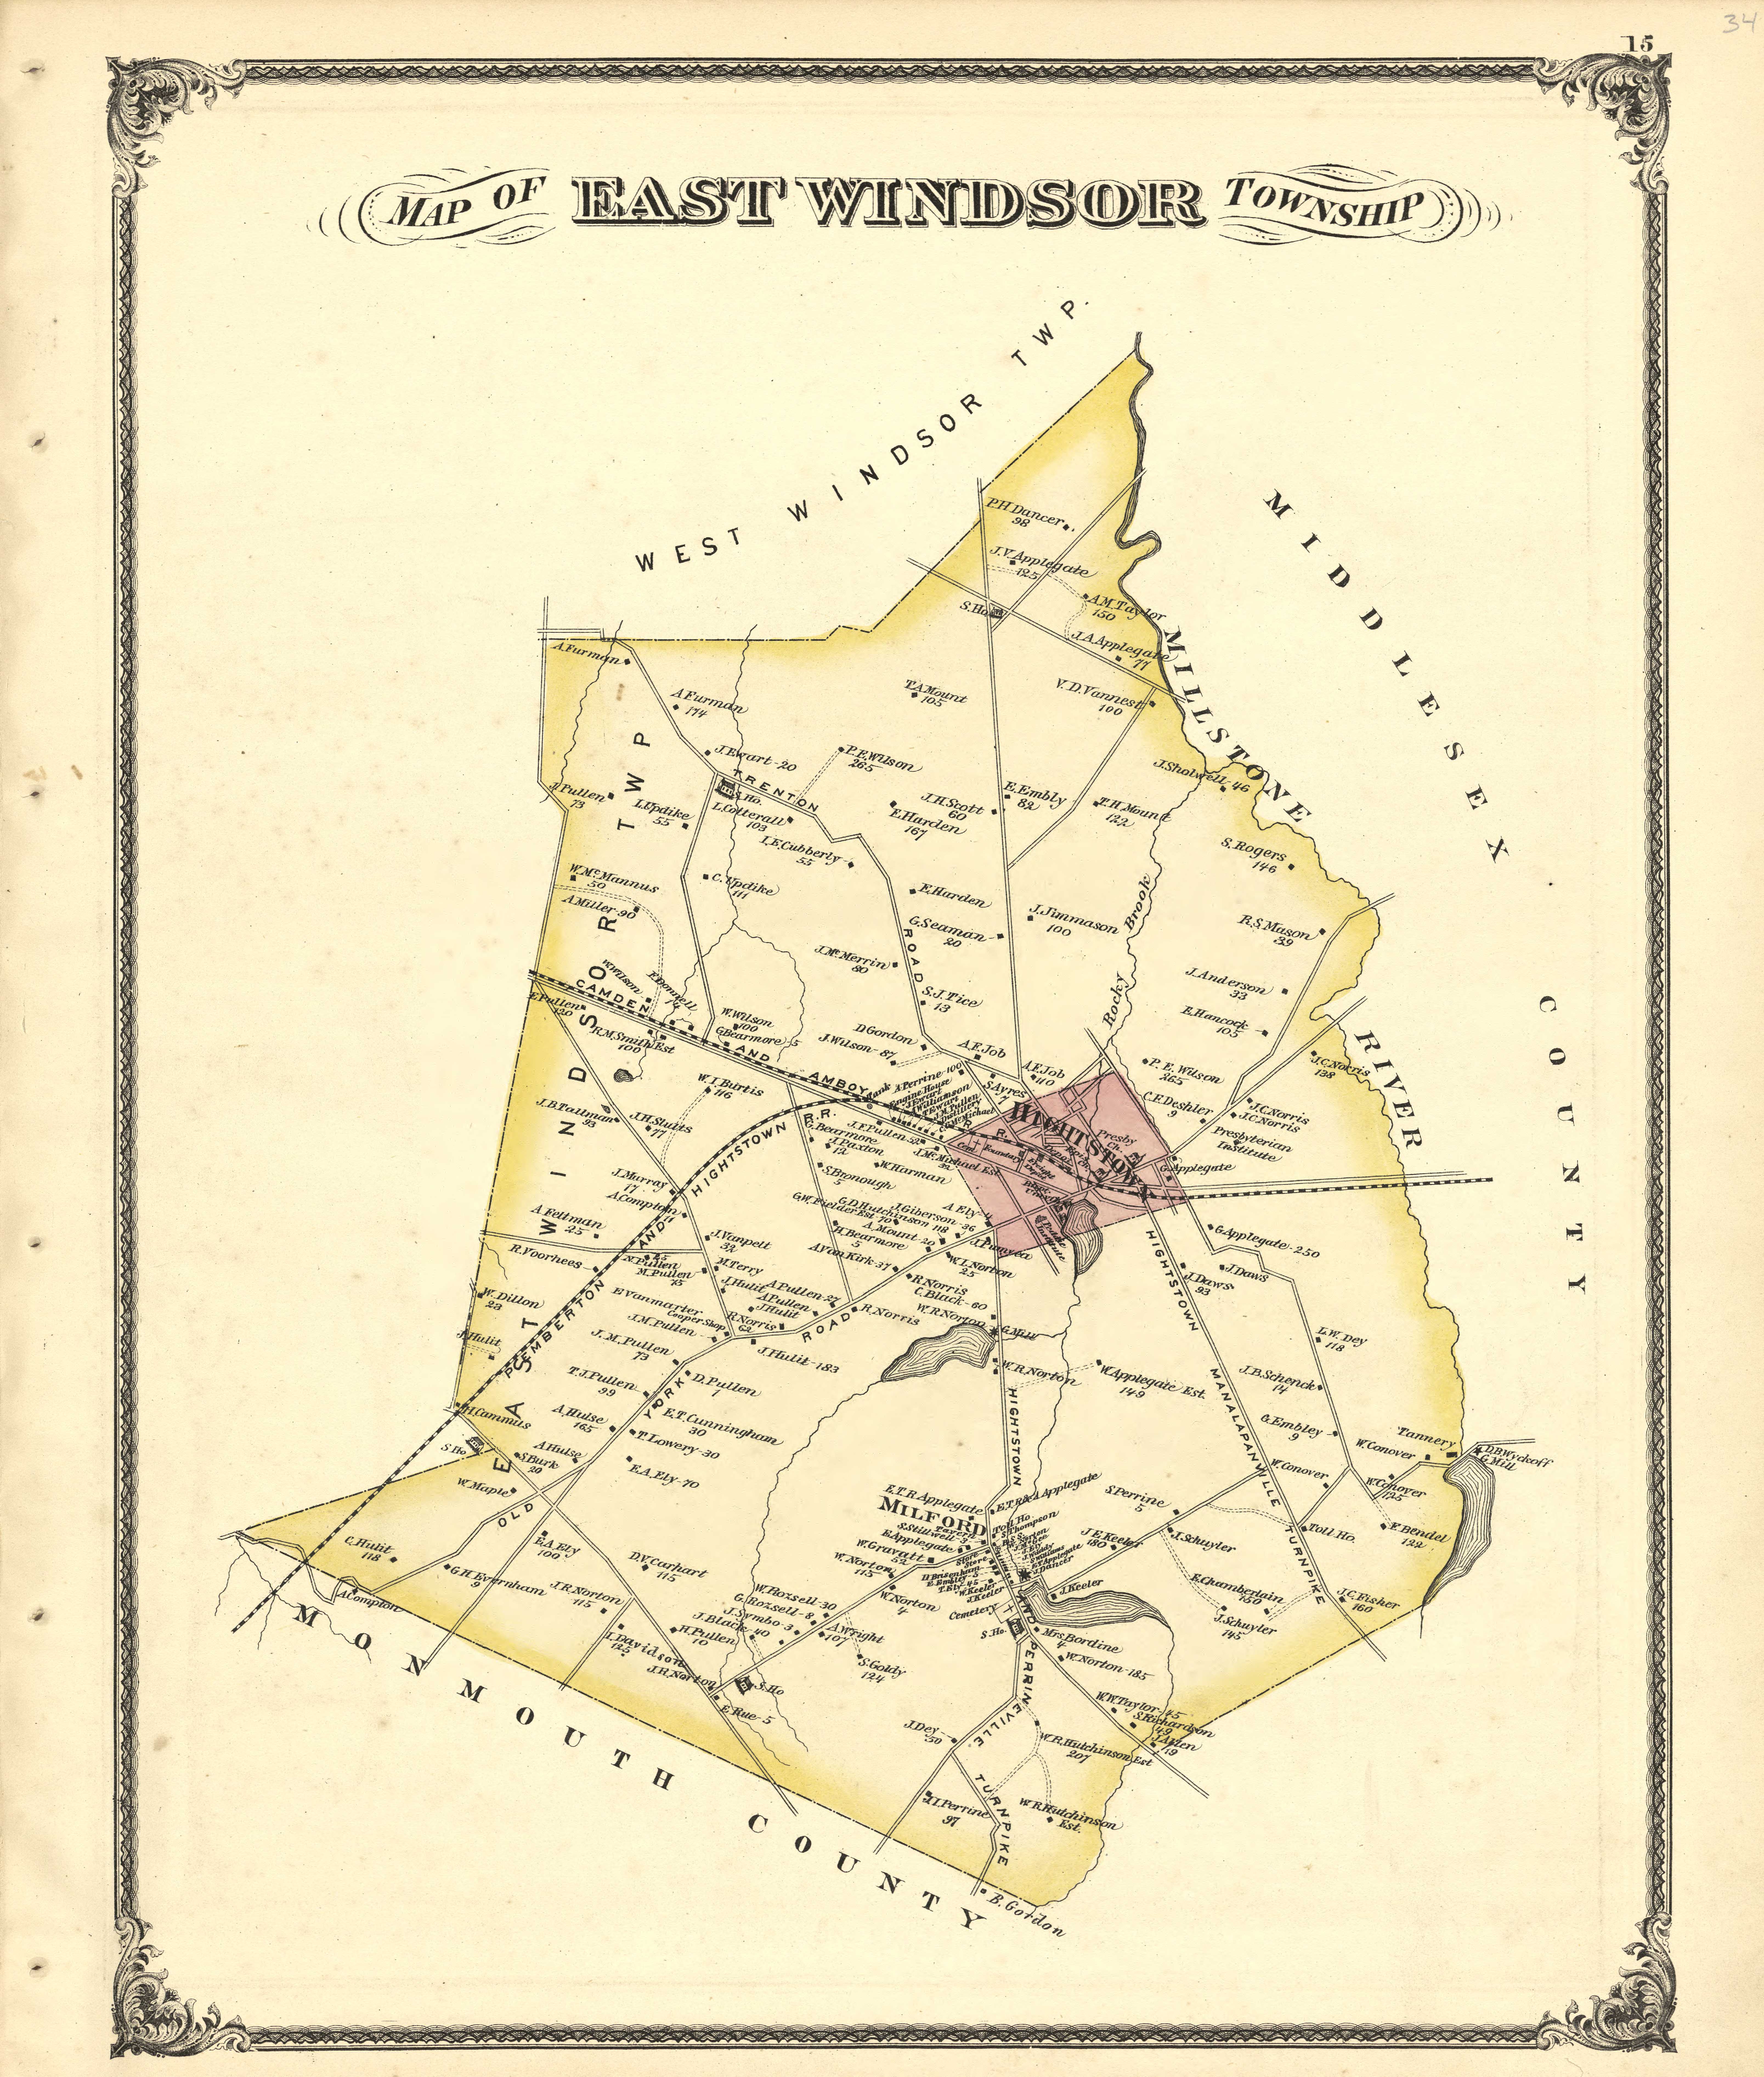 Maps From The Everts And Stewart Atlas Of Mercer County New Jersey 1875 East Windsor 1841